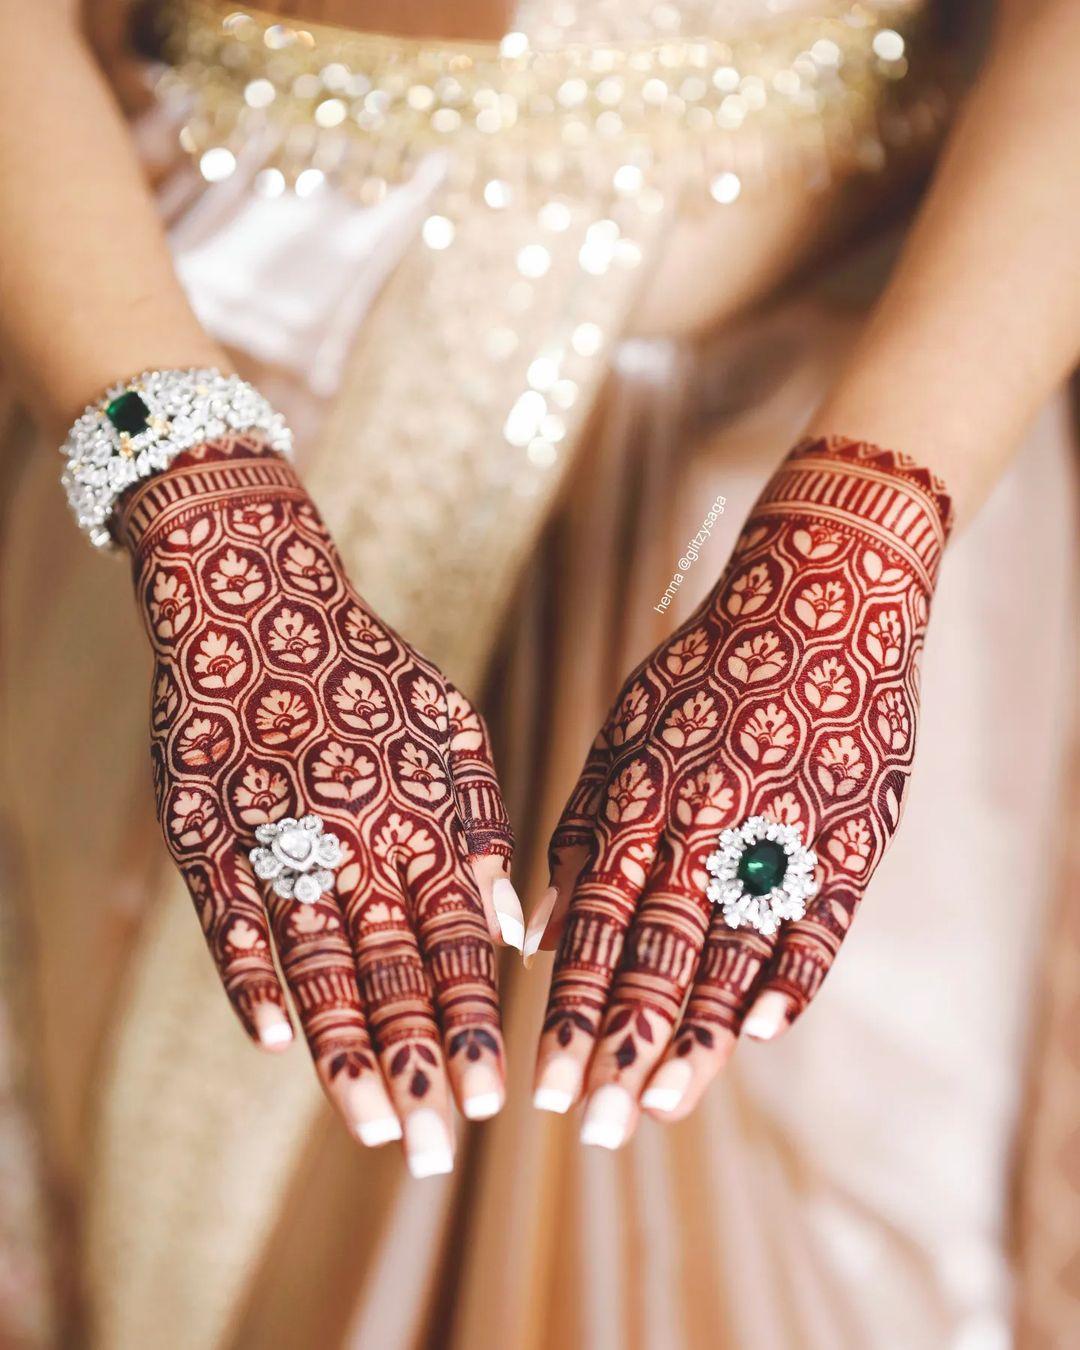 90+ Gorgeous Indian mehndi designs for hands this wedding season | Wedding mehndi  designs, Bridal mehndi designs, Indian mehndi designs